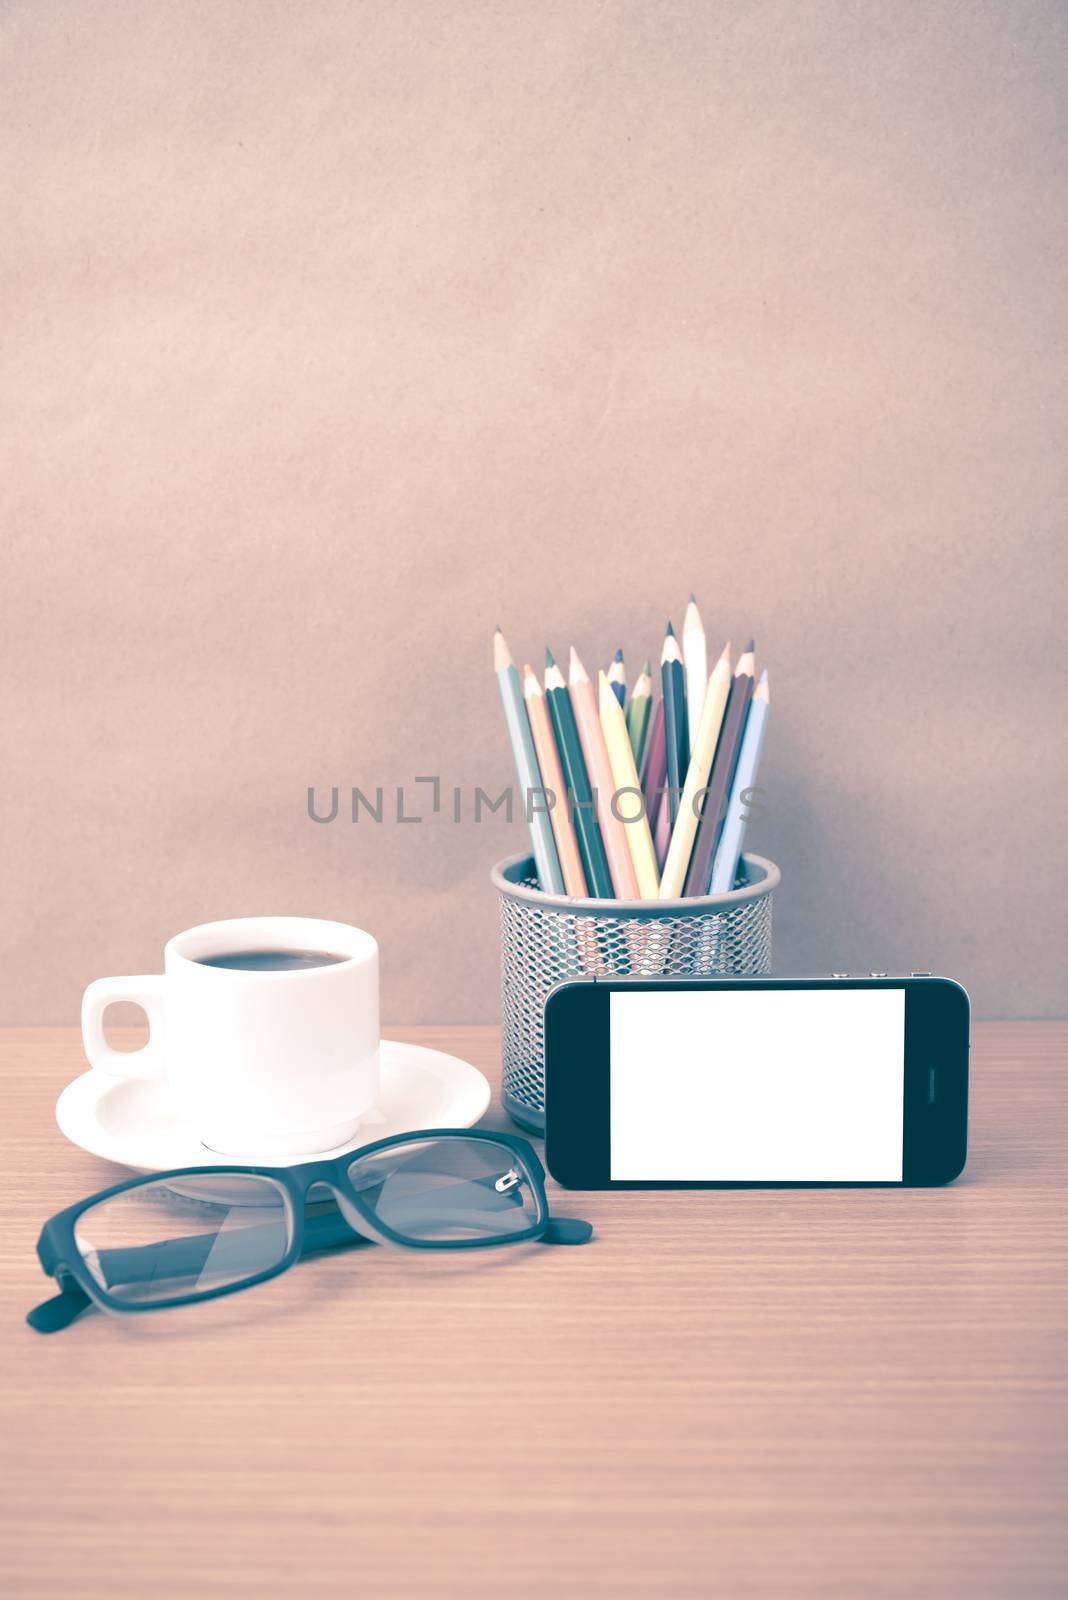 coffee,phone,eyeglasses and pencil on wood table background vintage style